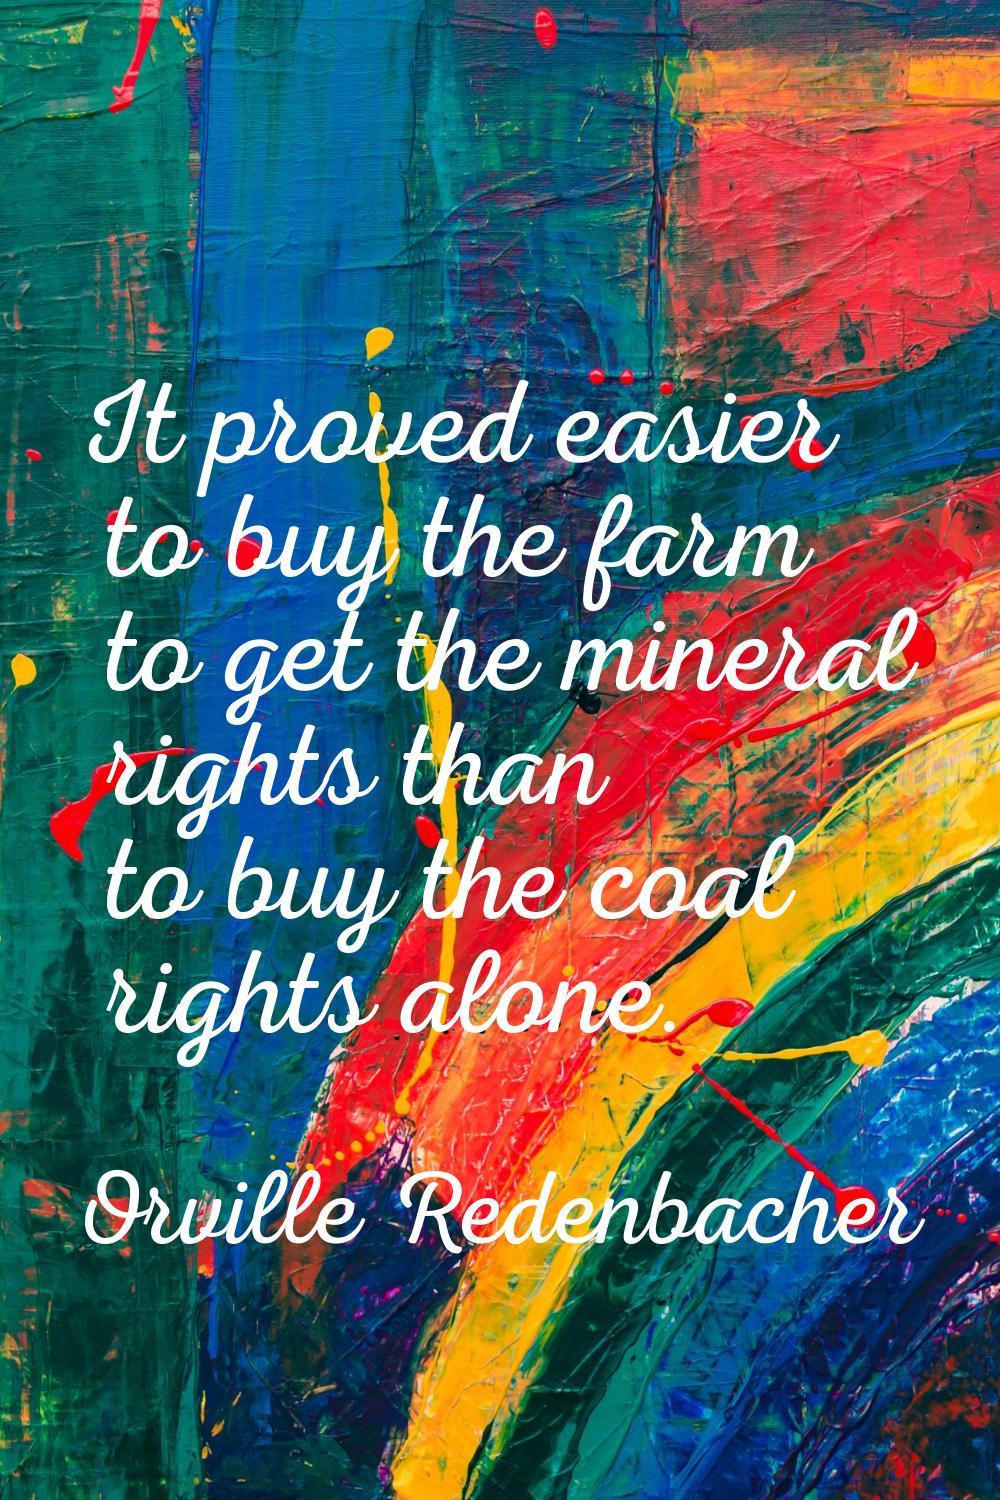 It proved easier to buy the farm to get the mineral rights than to buy the coal rights alone.